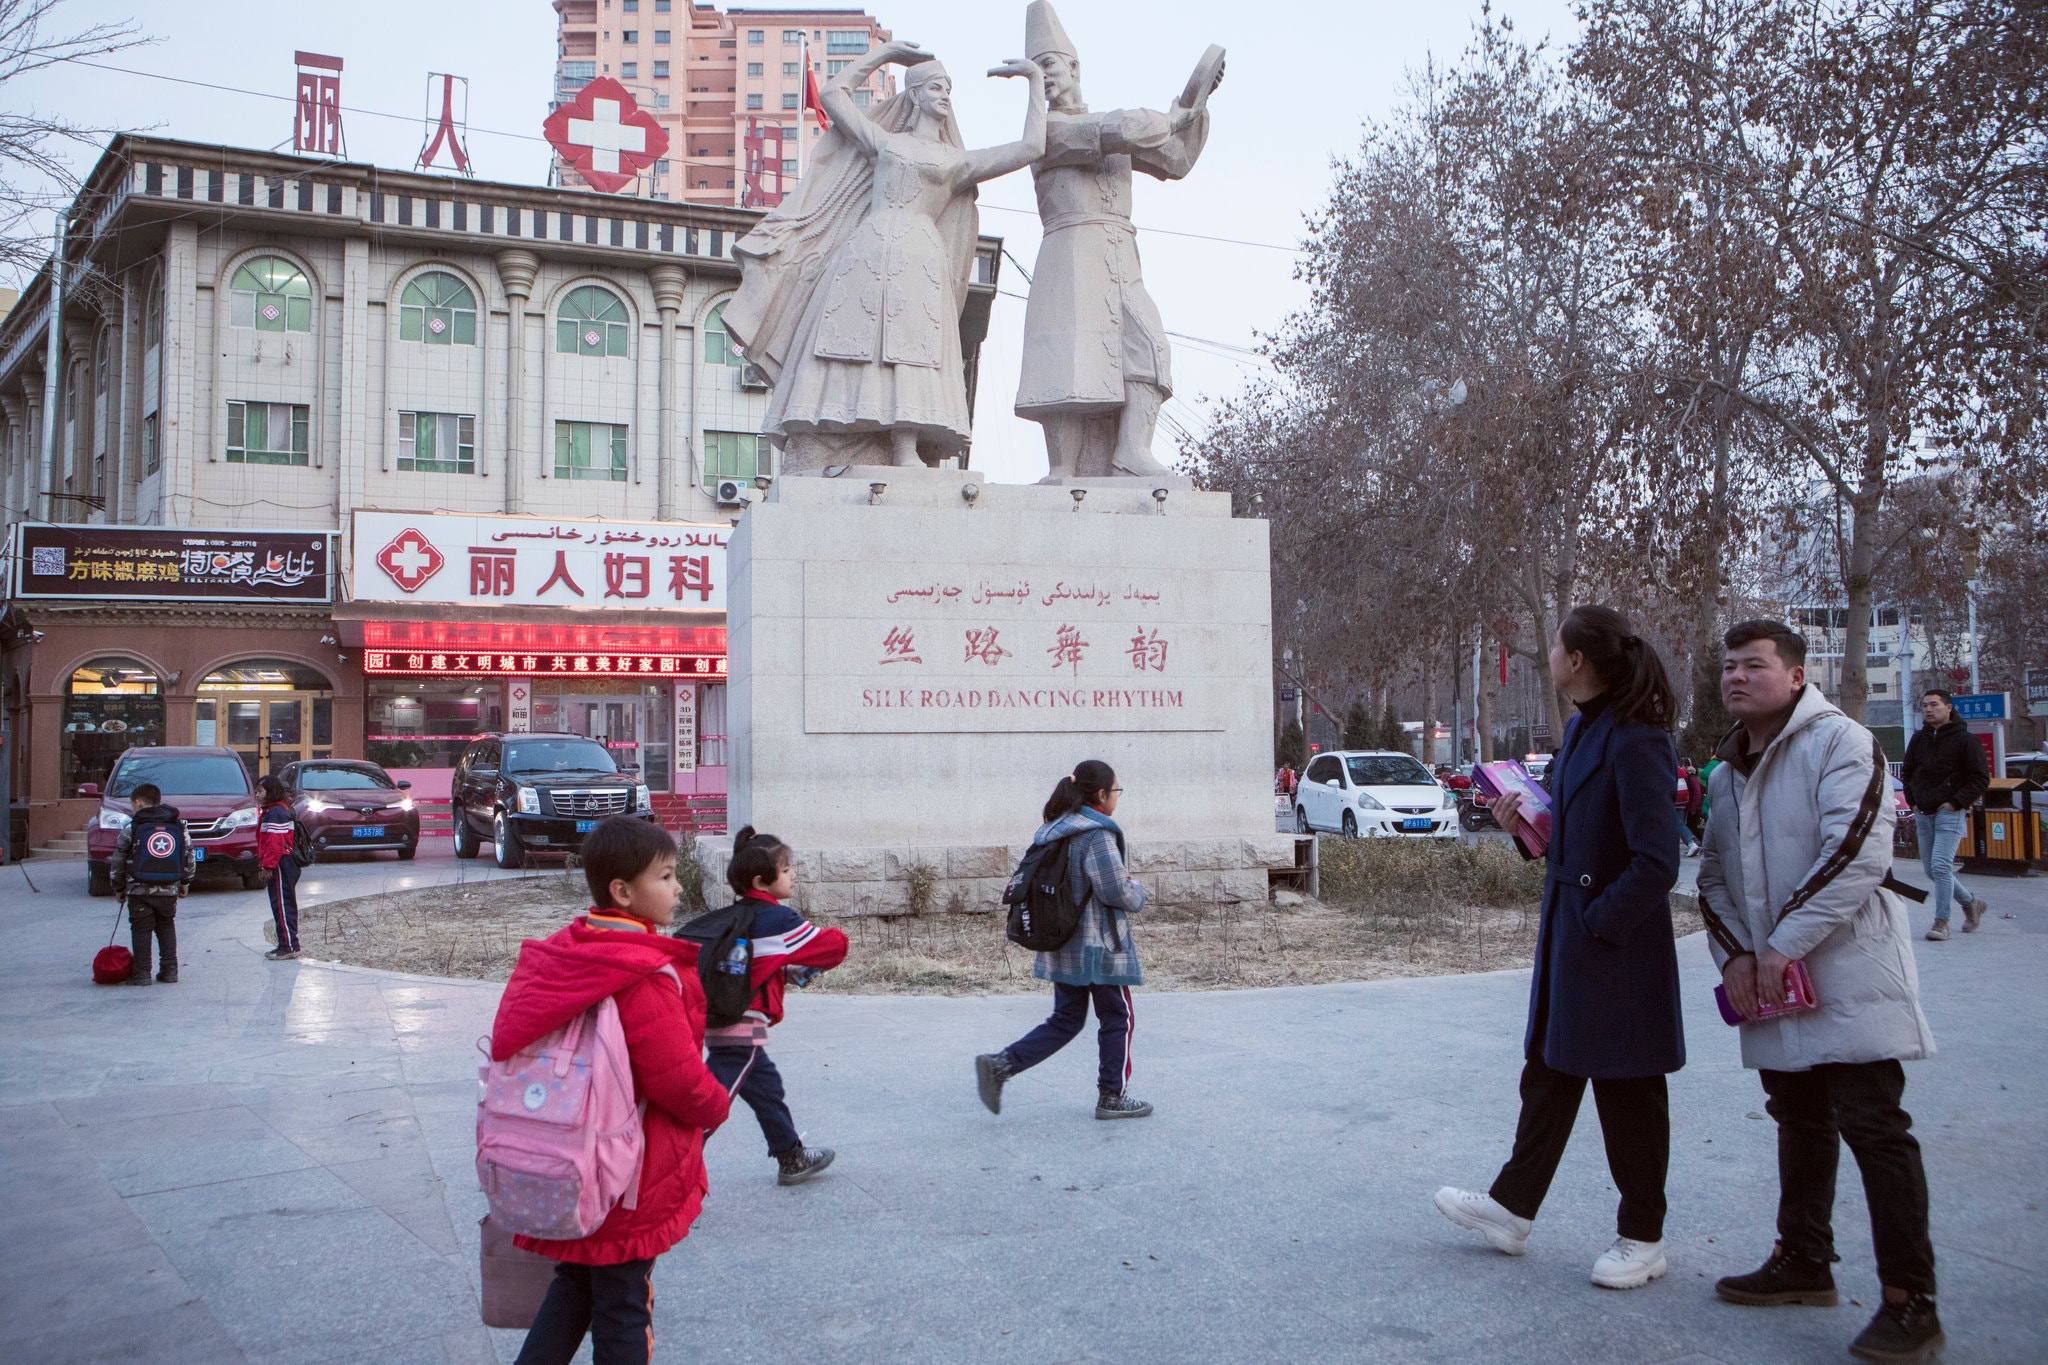 In China’s Crackdown on Muslims, Children Have Not Been Spared